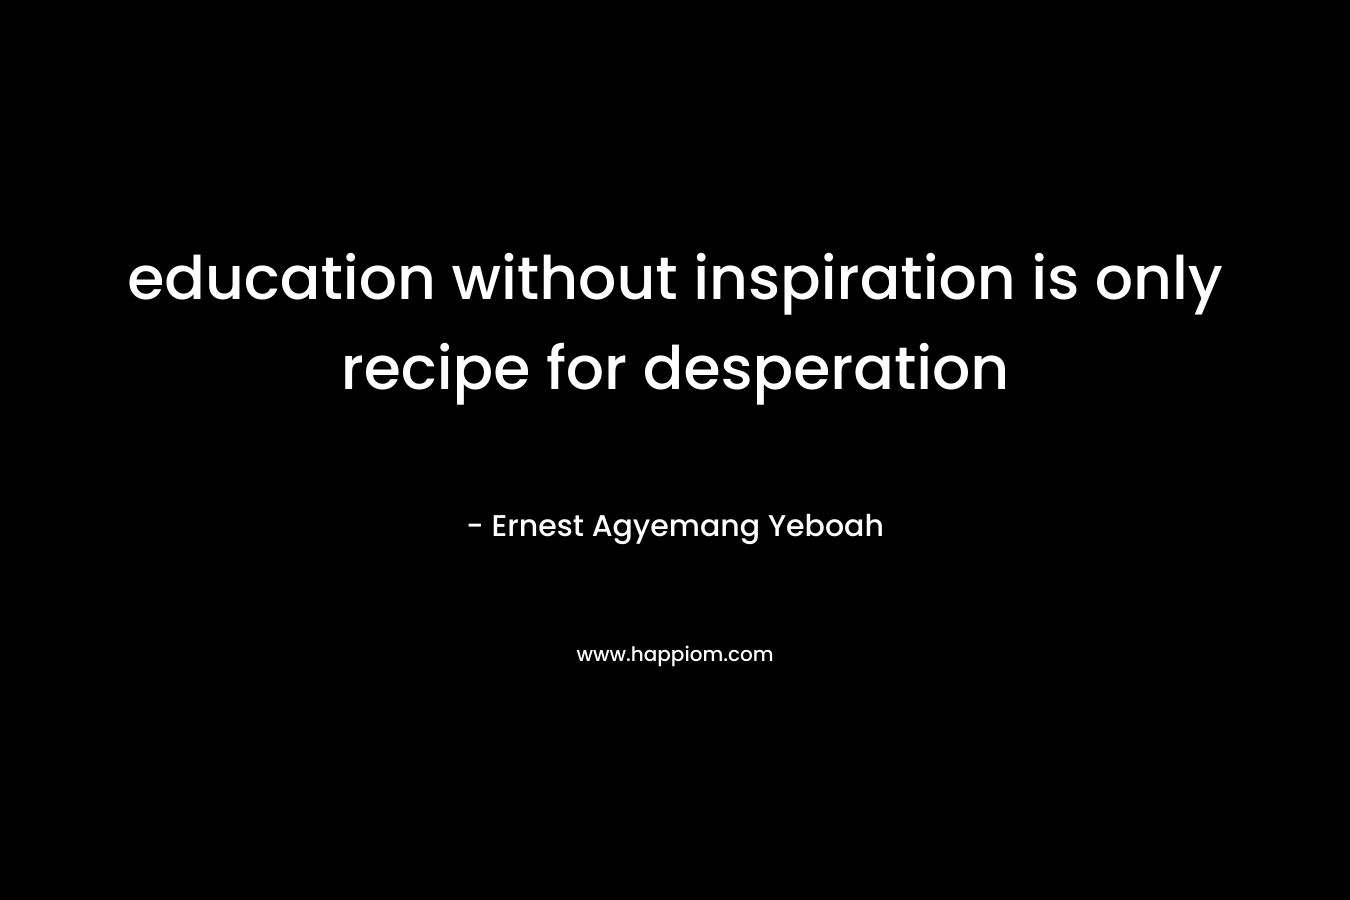 education without inspiration is only recipe for desperation – Ernest Agyemang Yeboah